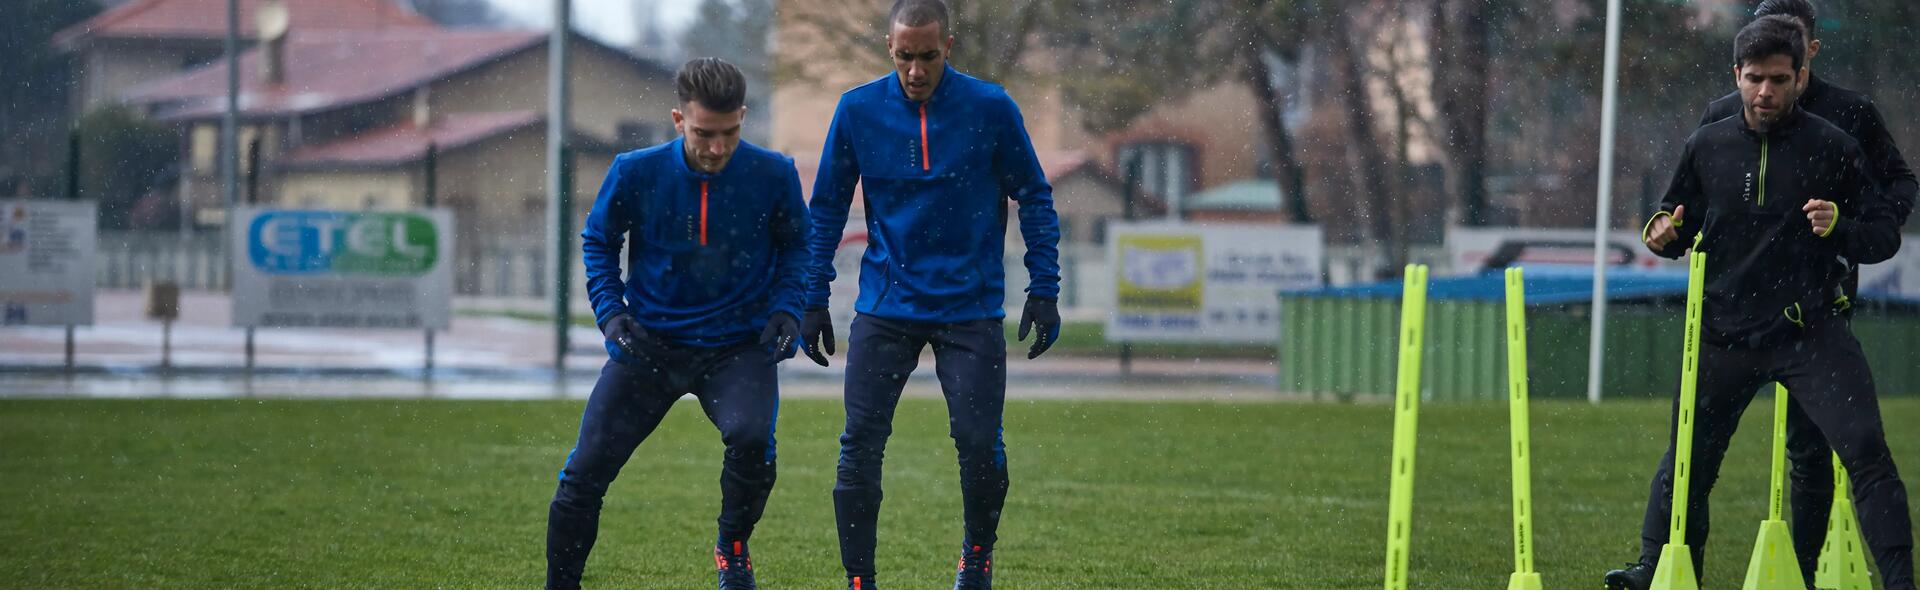 Enjoying your training when the weather's bad